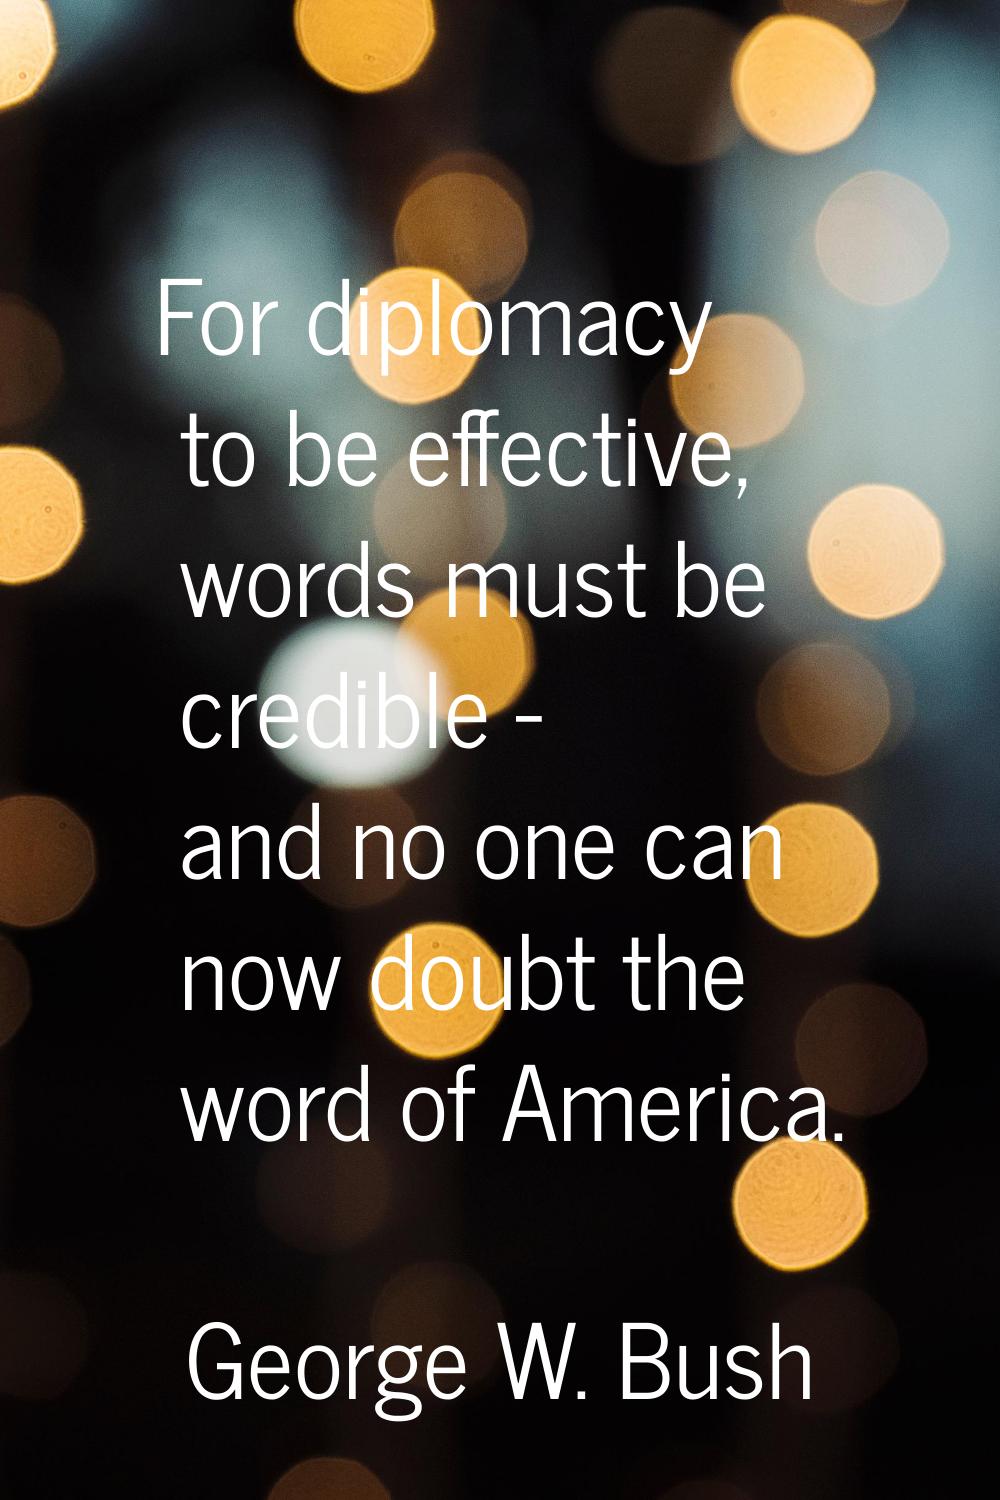 For diplomacy to be effective, words must be credible - and no one can now doubt the word of Americ